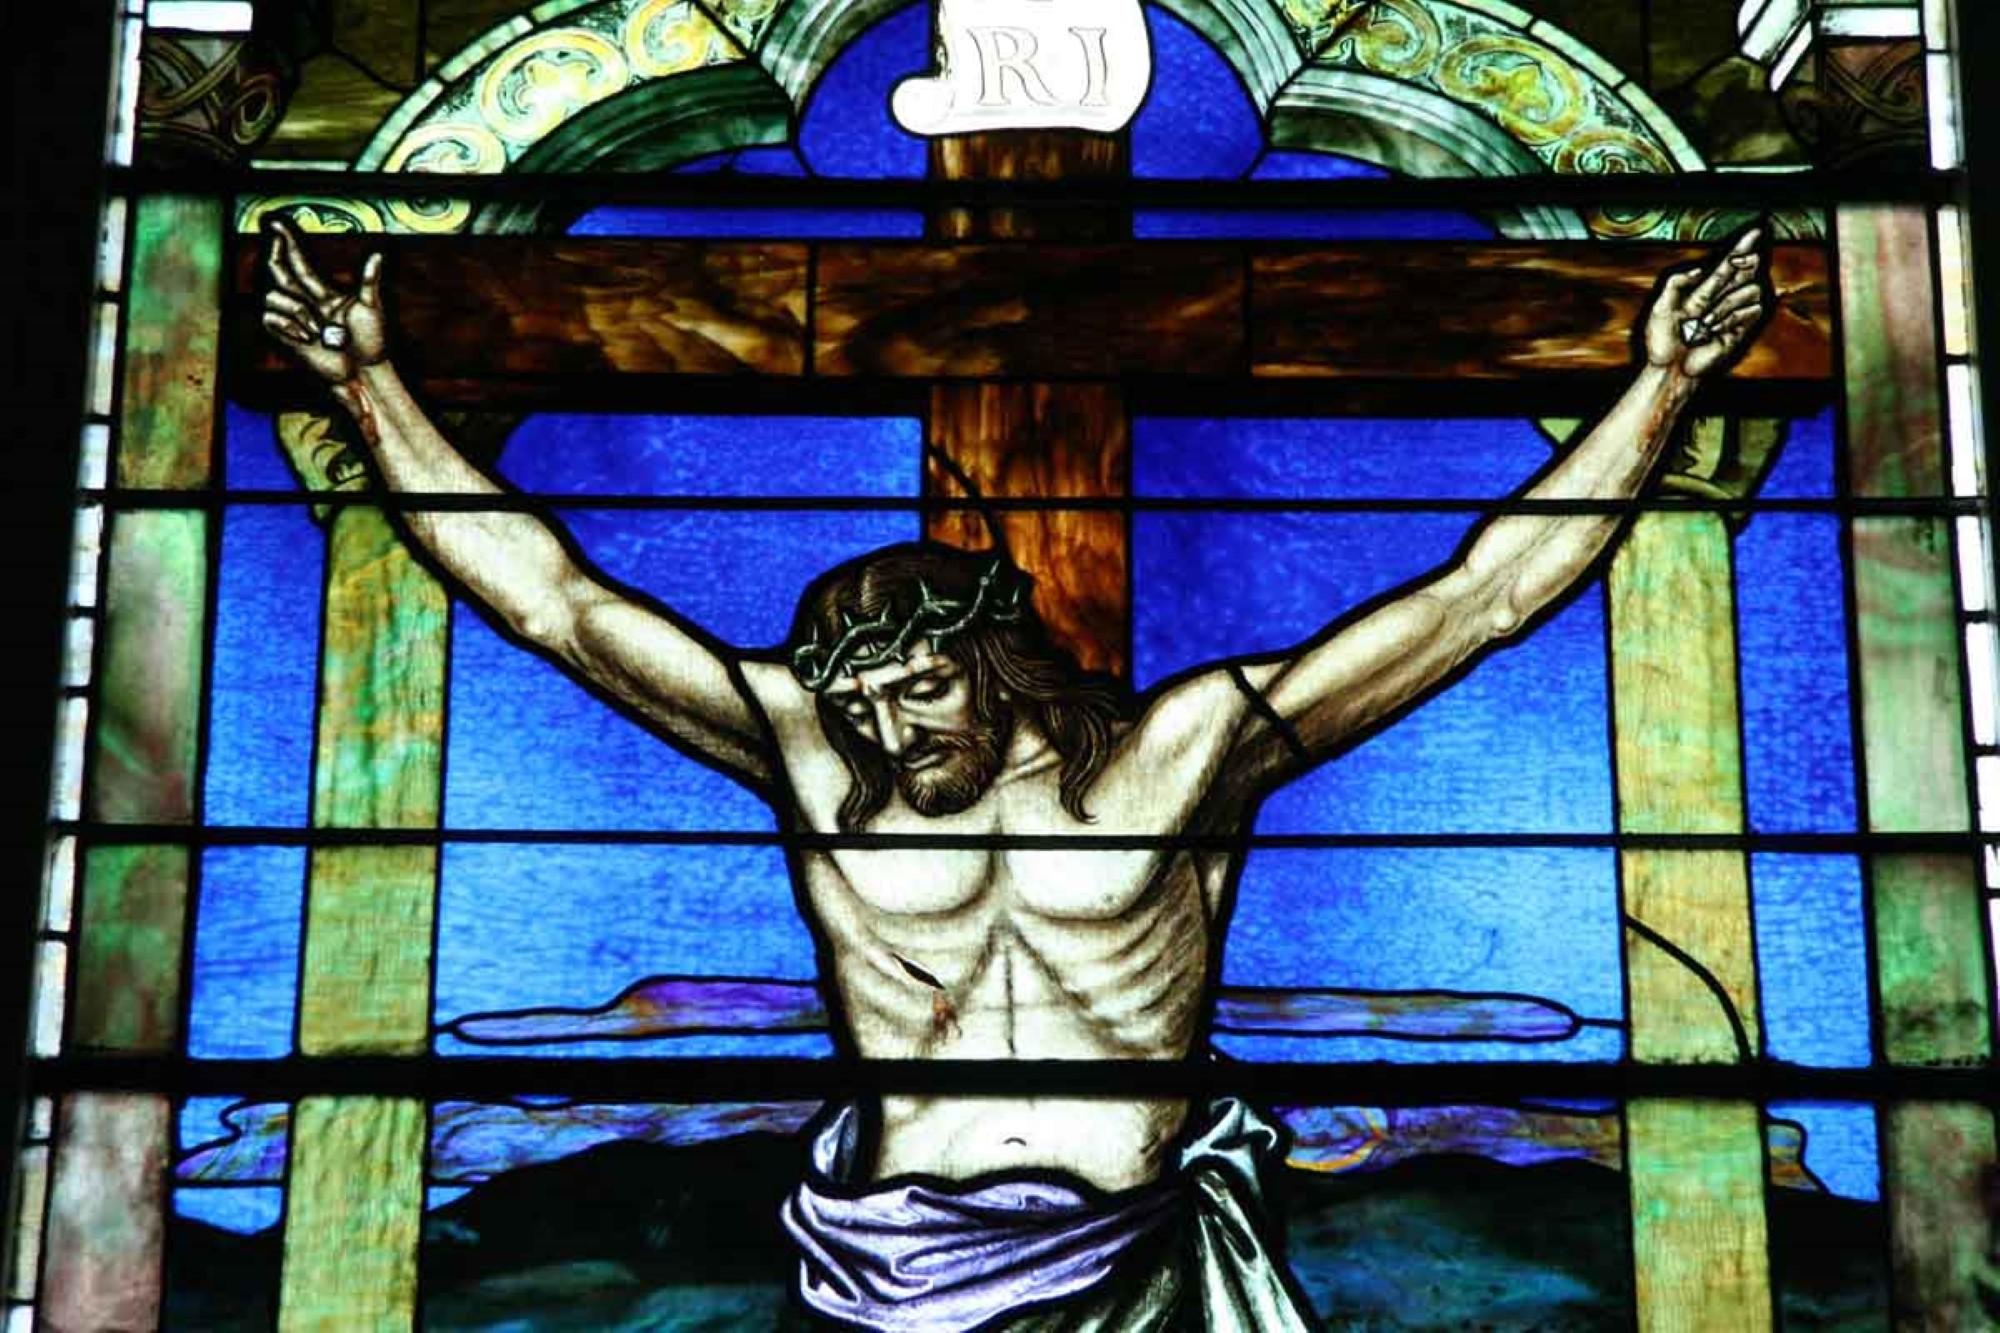 American 1901 Religious Large Stained Glass Portraying the Crucifixion of Our Lord Jesus